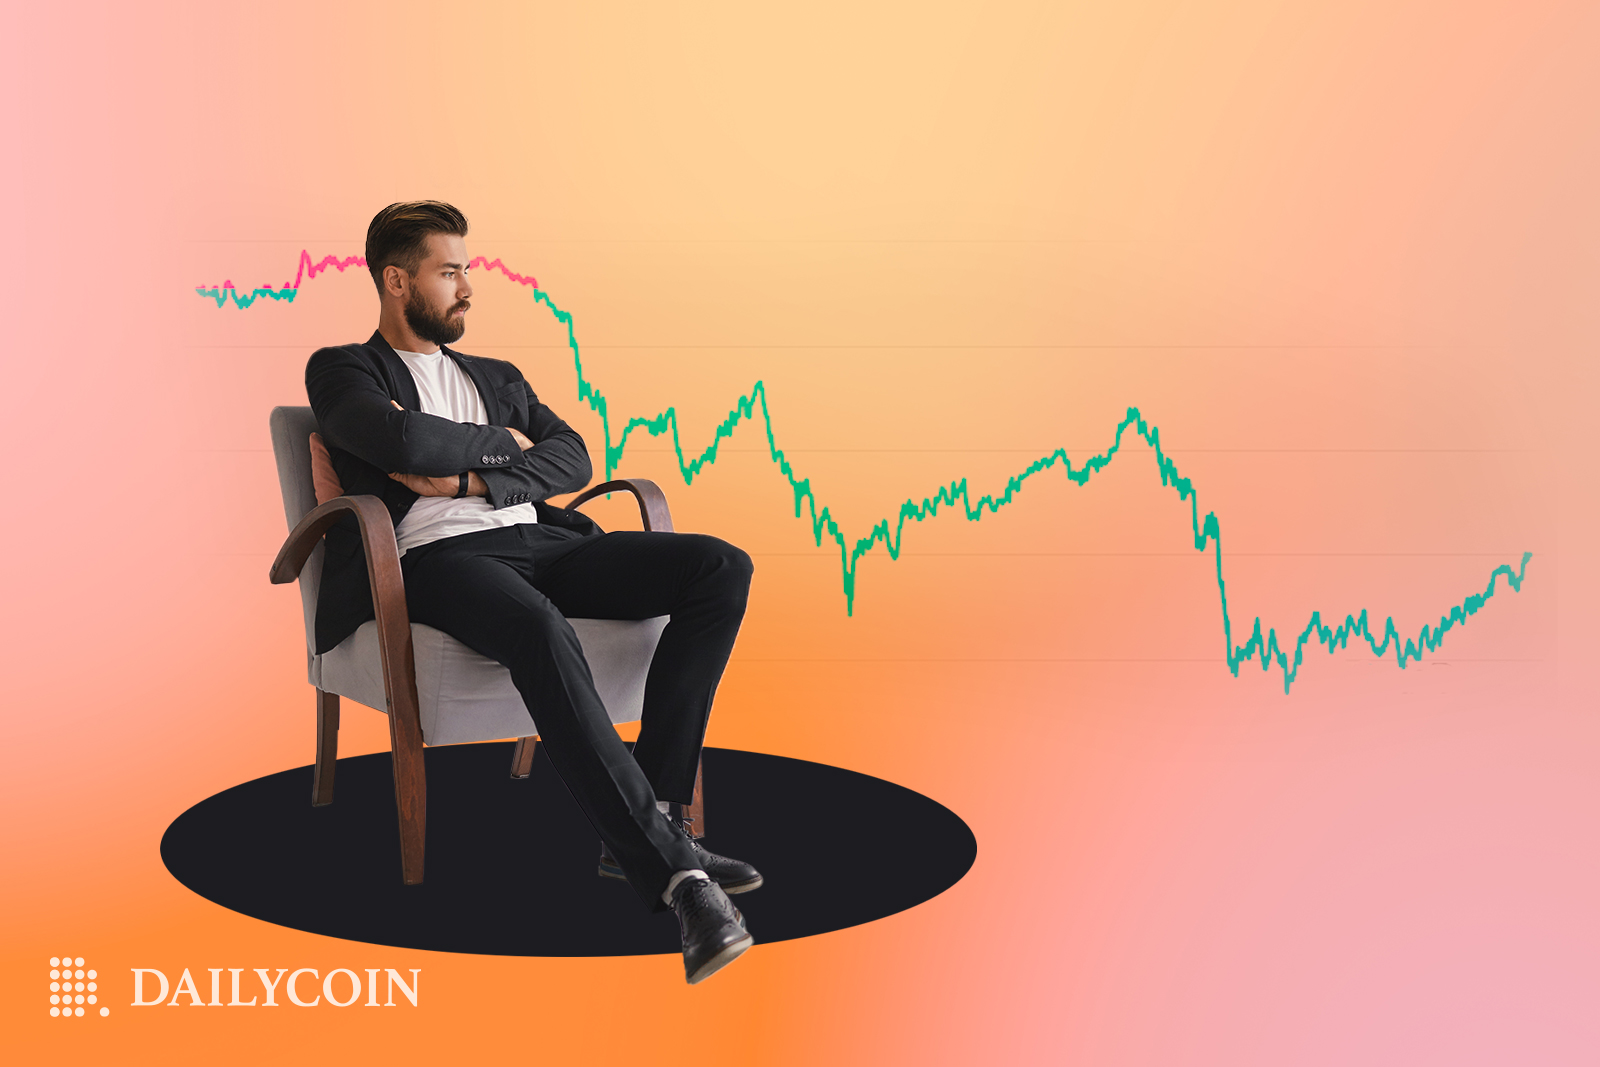 a person sitting on a chair with a bored expression with a XRP chart in a declining trend in the background